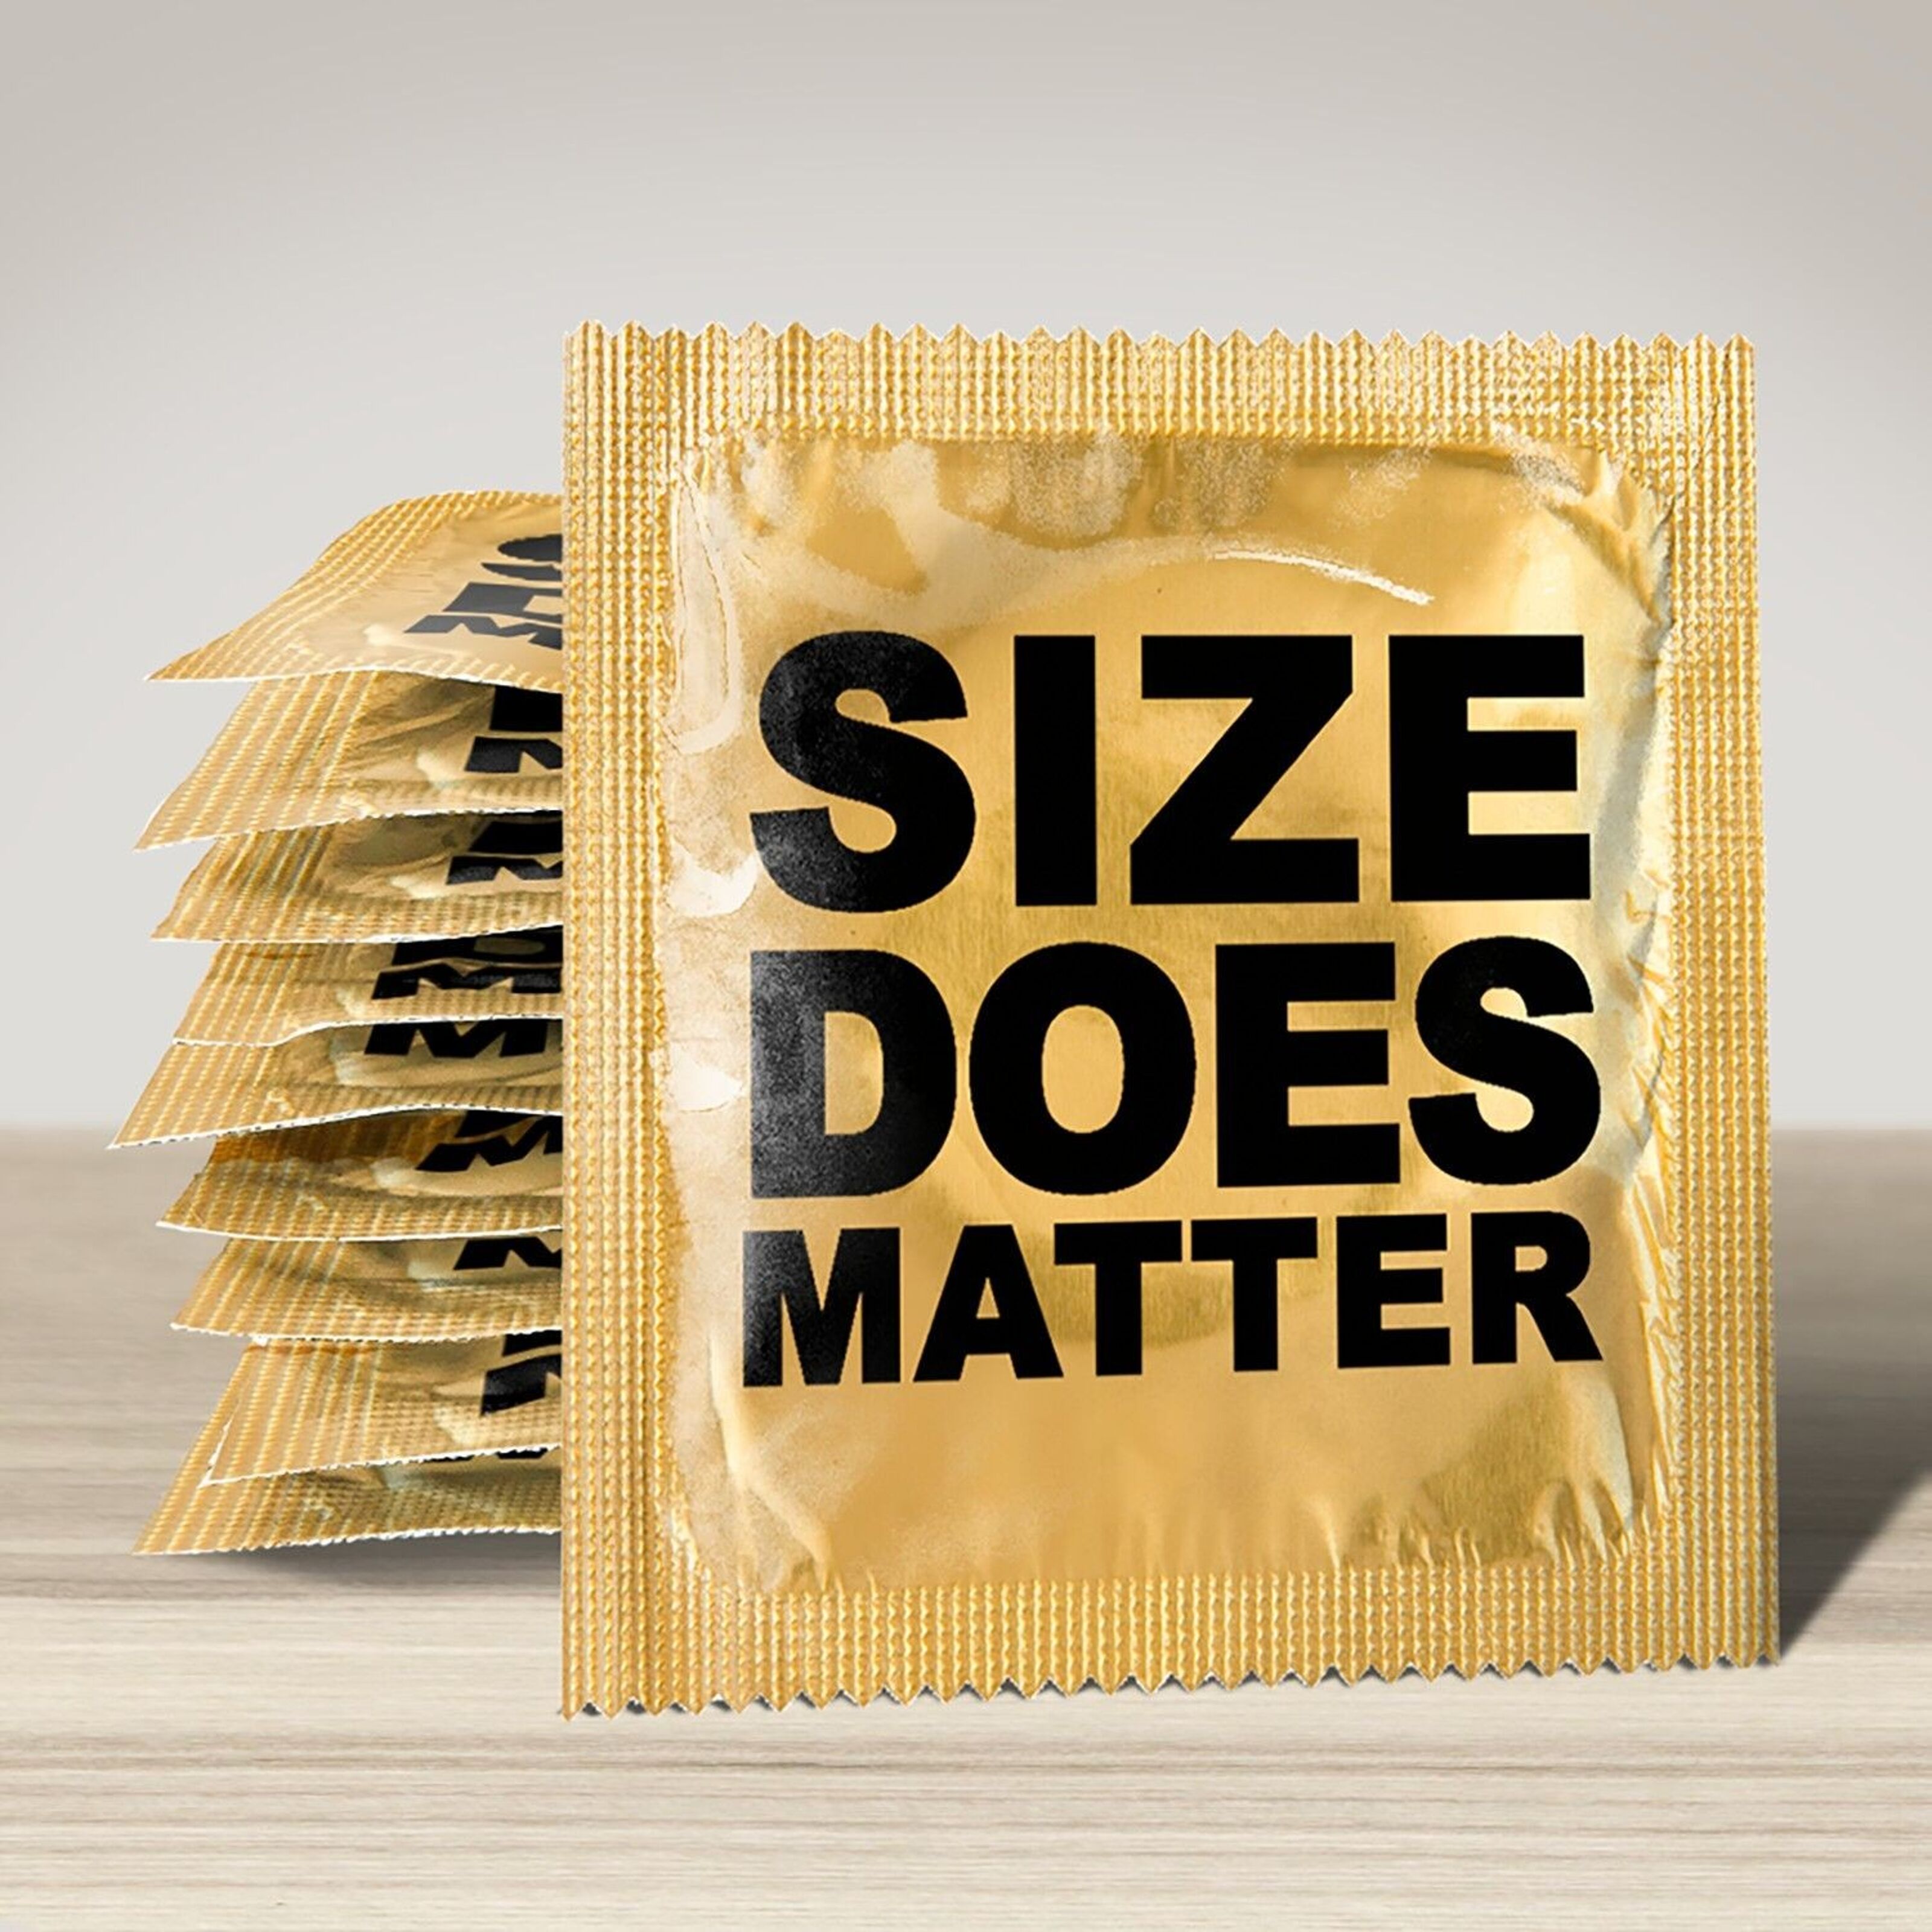 Why does the condom size matter?